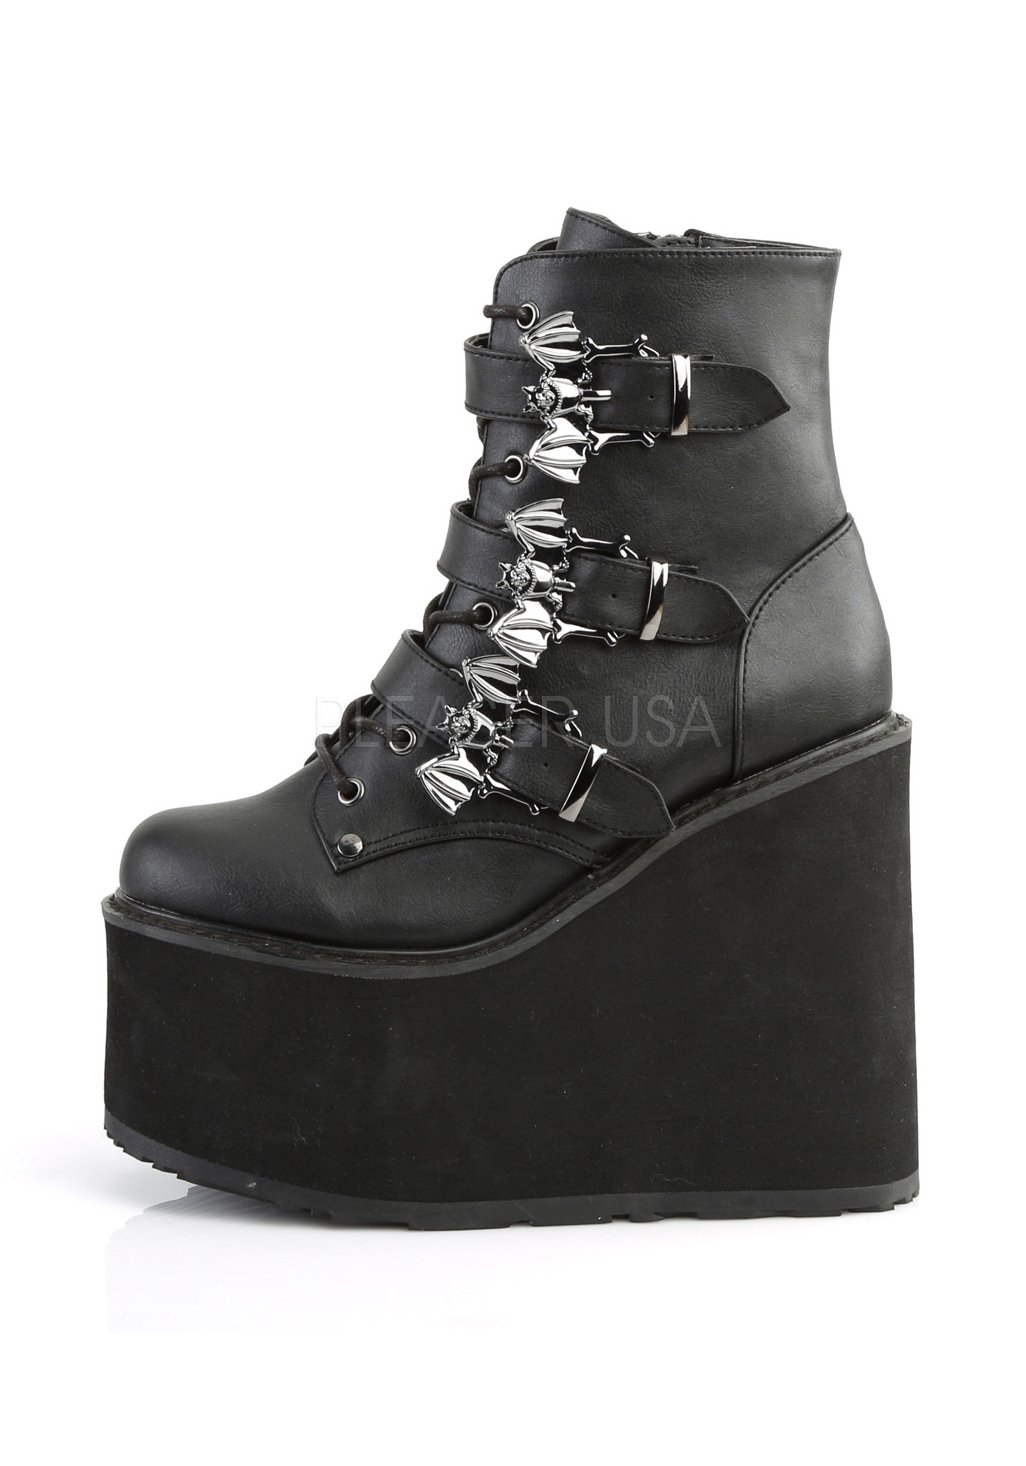 Demonia SWING-103 5 1/2'' Platform Lace-Up Ankle Boot W 3 Buckle Straps ...